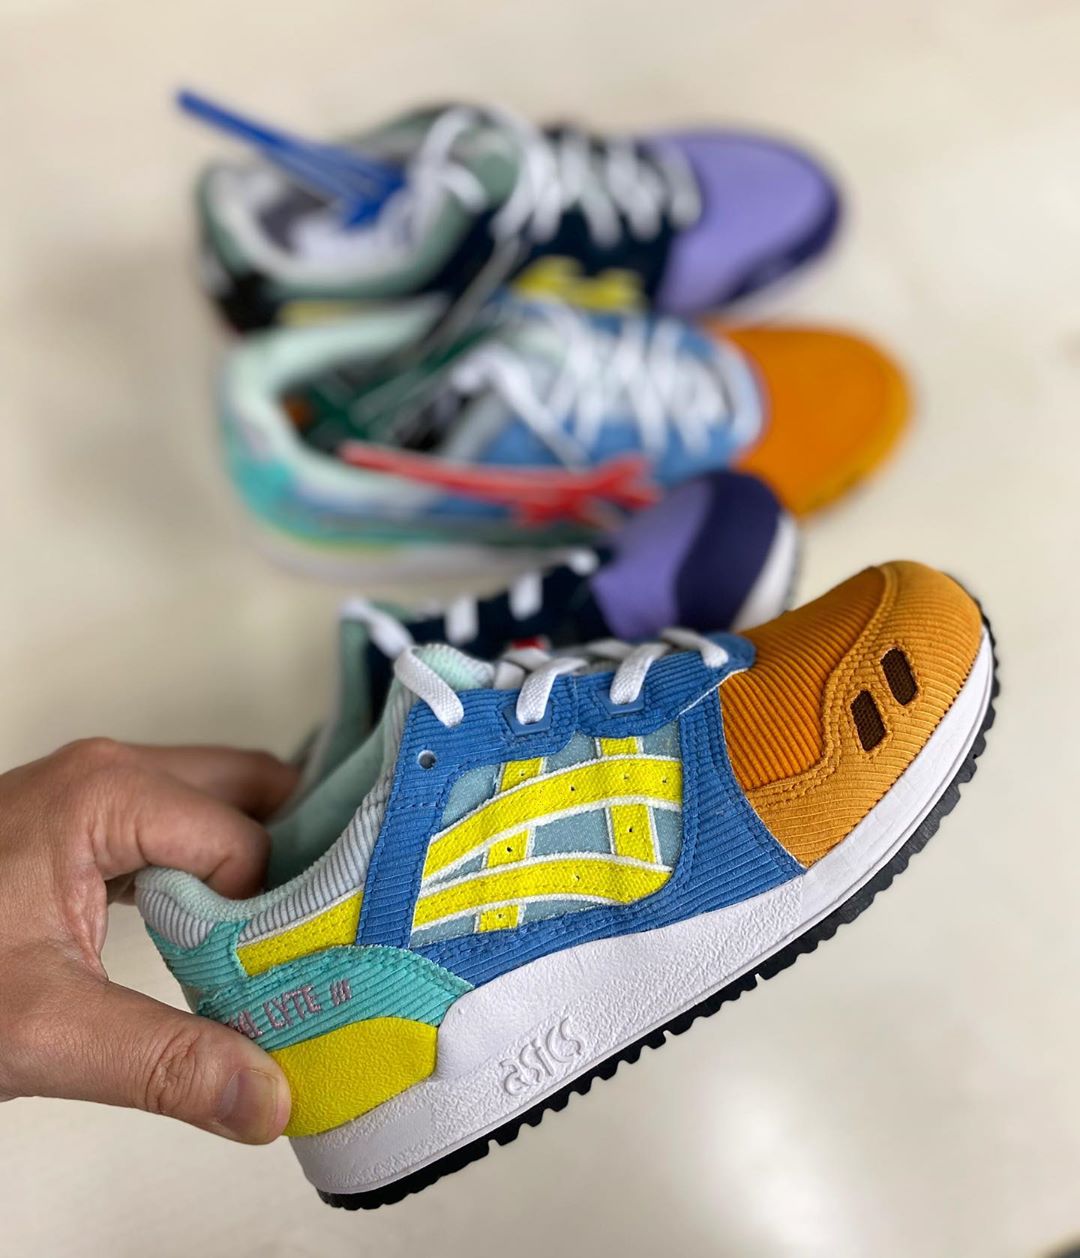 The Sean Wotherspoon x atmos x ASICS GEL-LYTE III Gets a US 